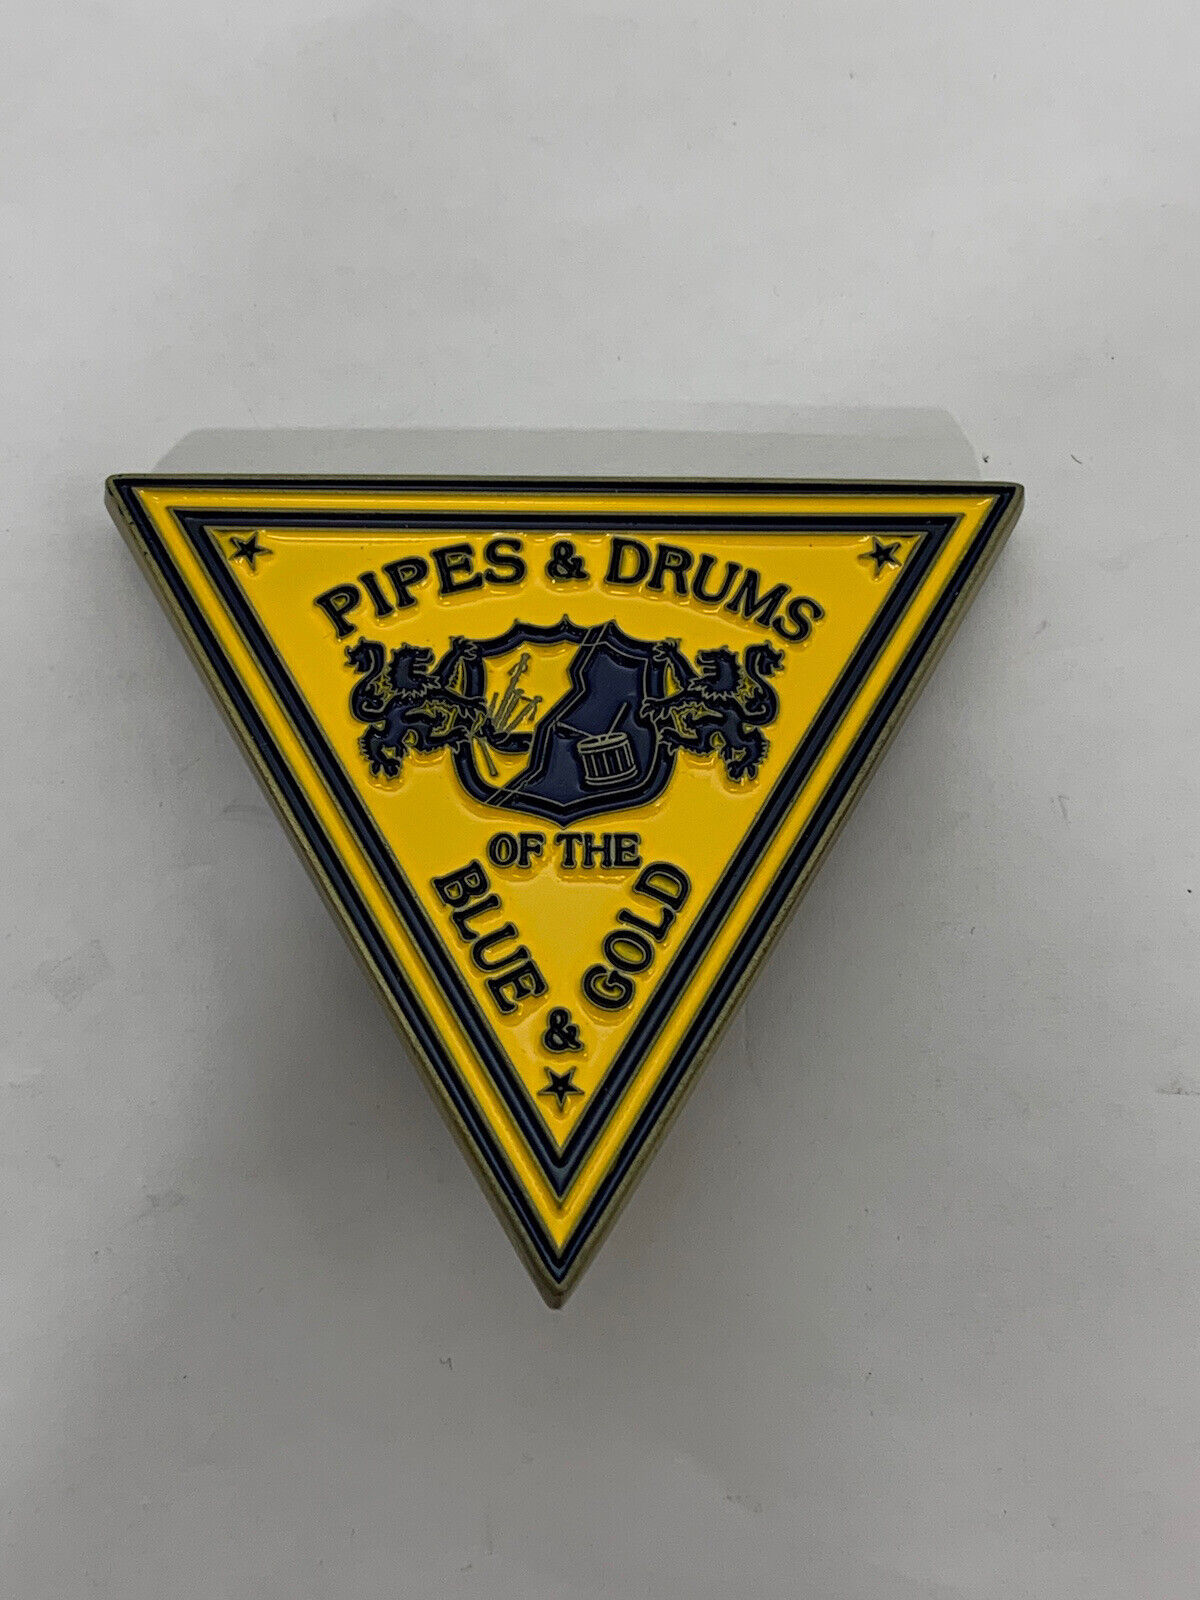 Pipes & Drums of the Blue and Gold NJSP New Jersey State Police Challenge Coin